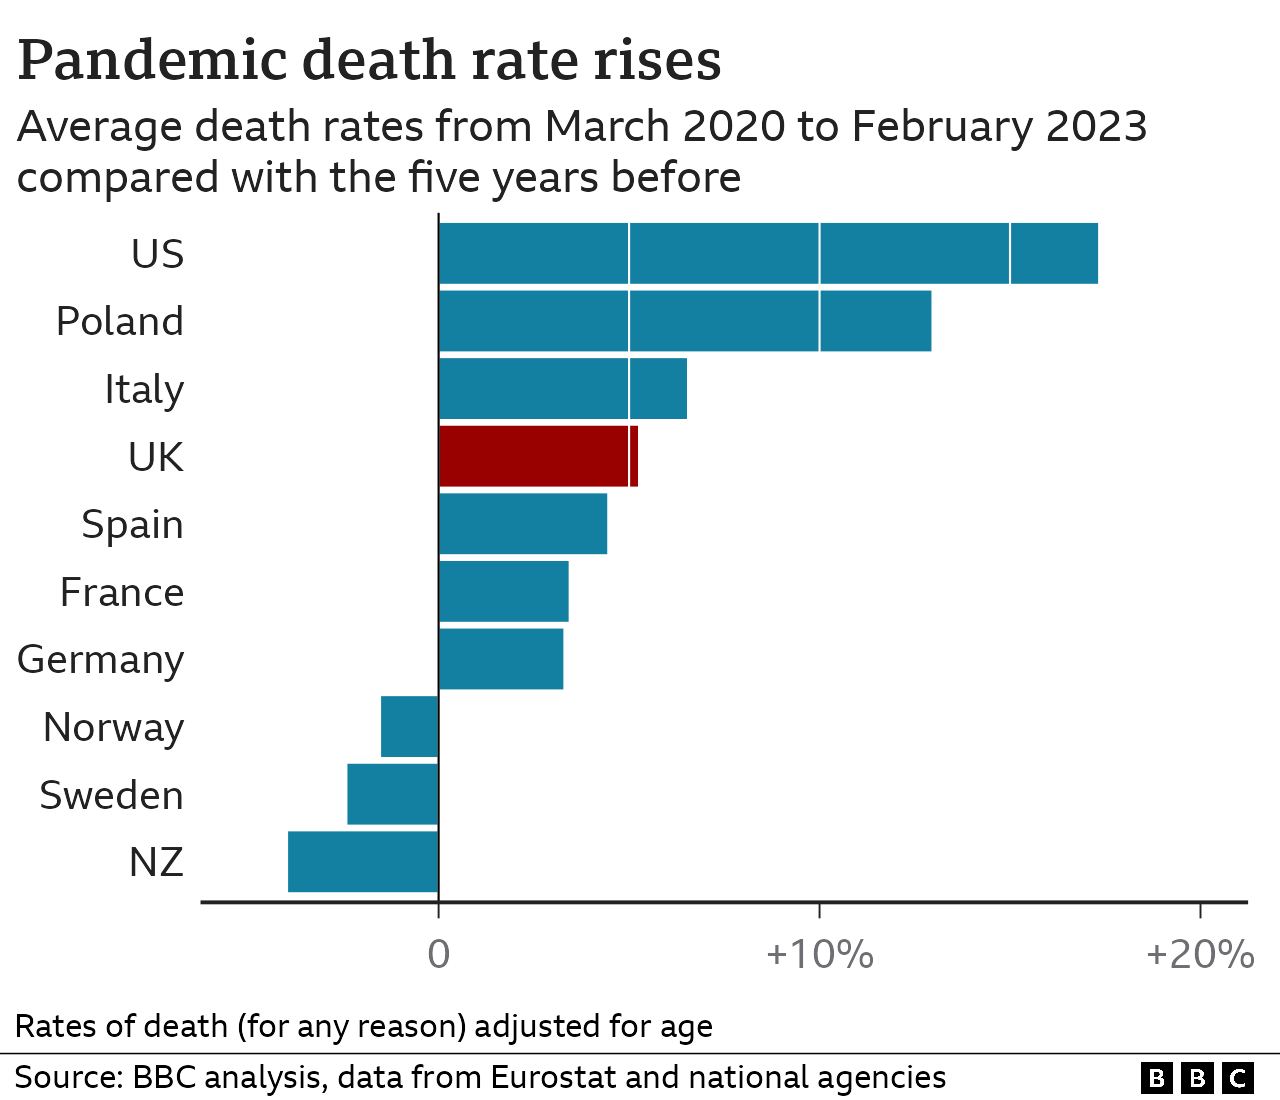 A bar chart showing age adjusted death rates between March 2020 and February 2023 compared with the five years previously. The bars are horizontal and show 10 countries. The UK is in the middle of the pack with about a 6% increase in death rates over the covid period. The US has the highest increase at over 15% and New Zealand has the lowest at about -4%